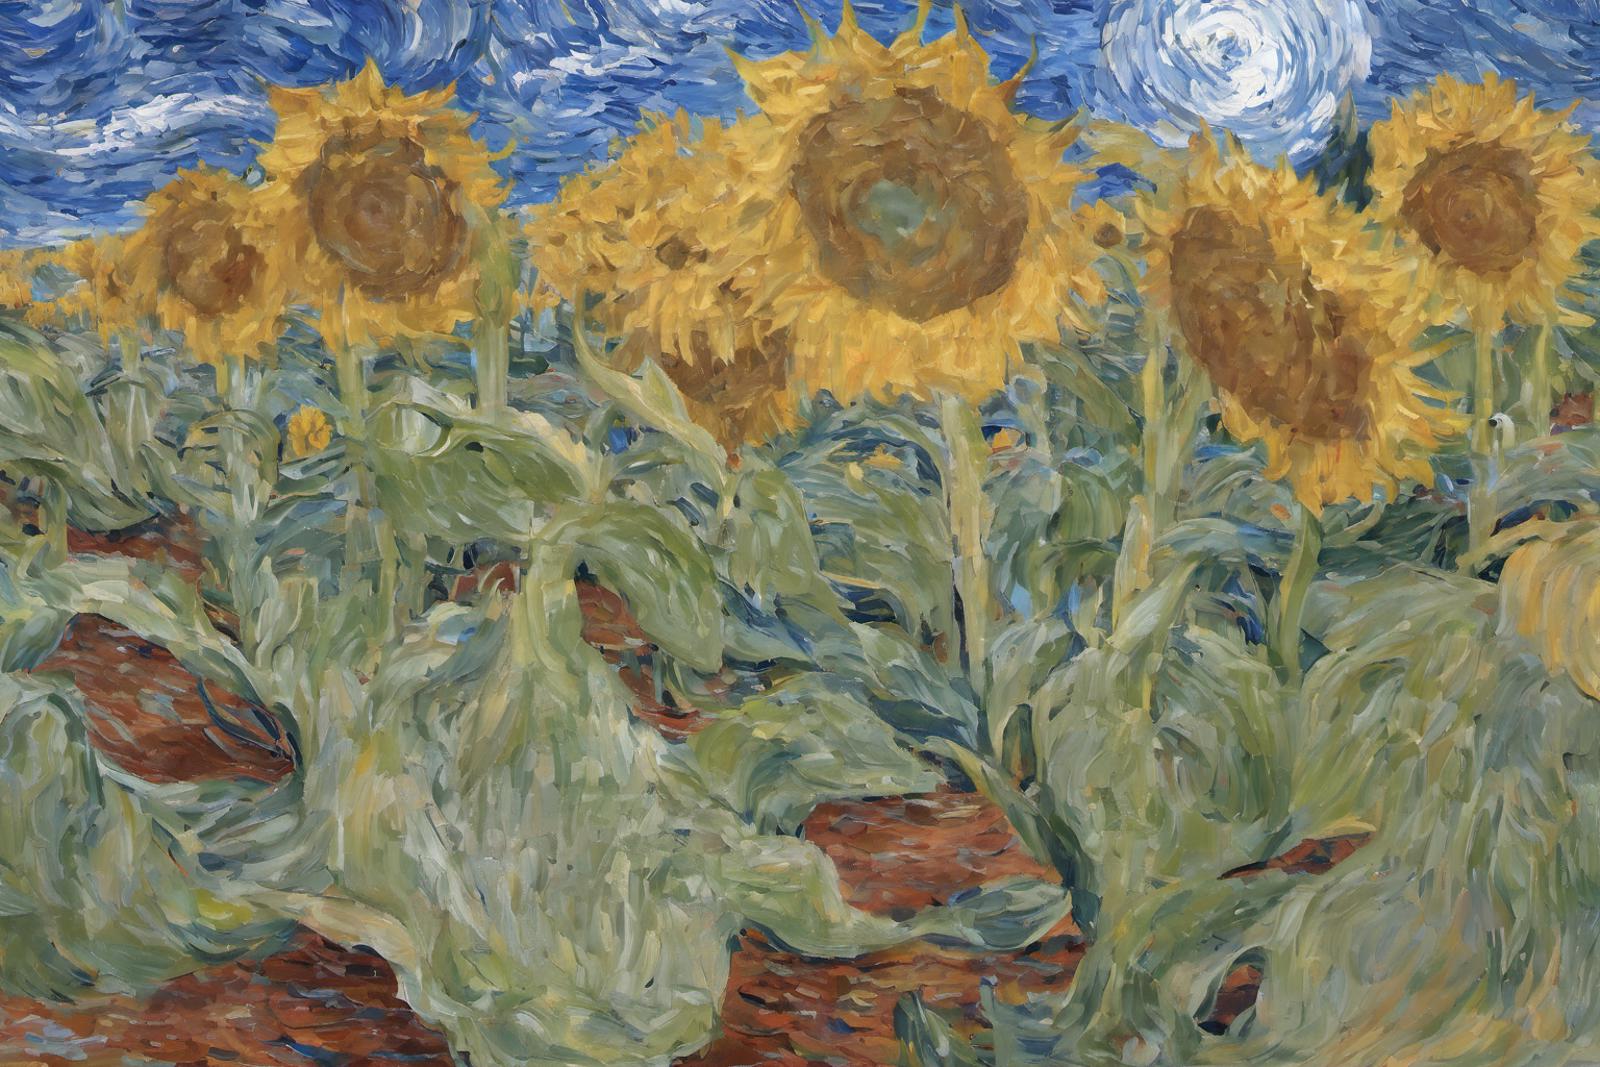 A group of sunflowers in a field with blue sky and white clouds in the background.